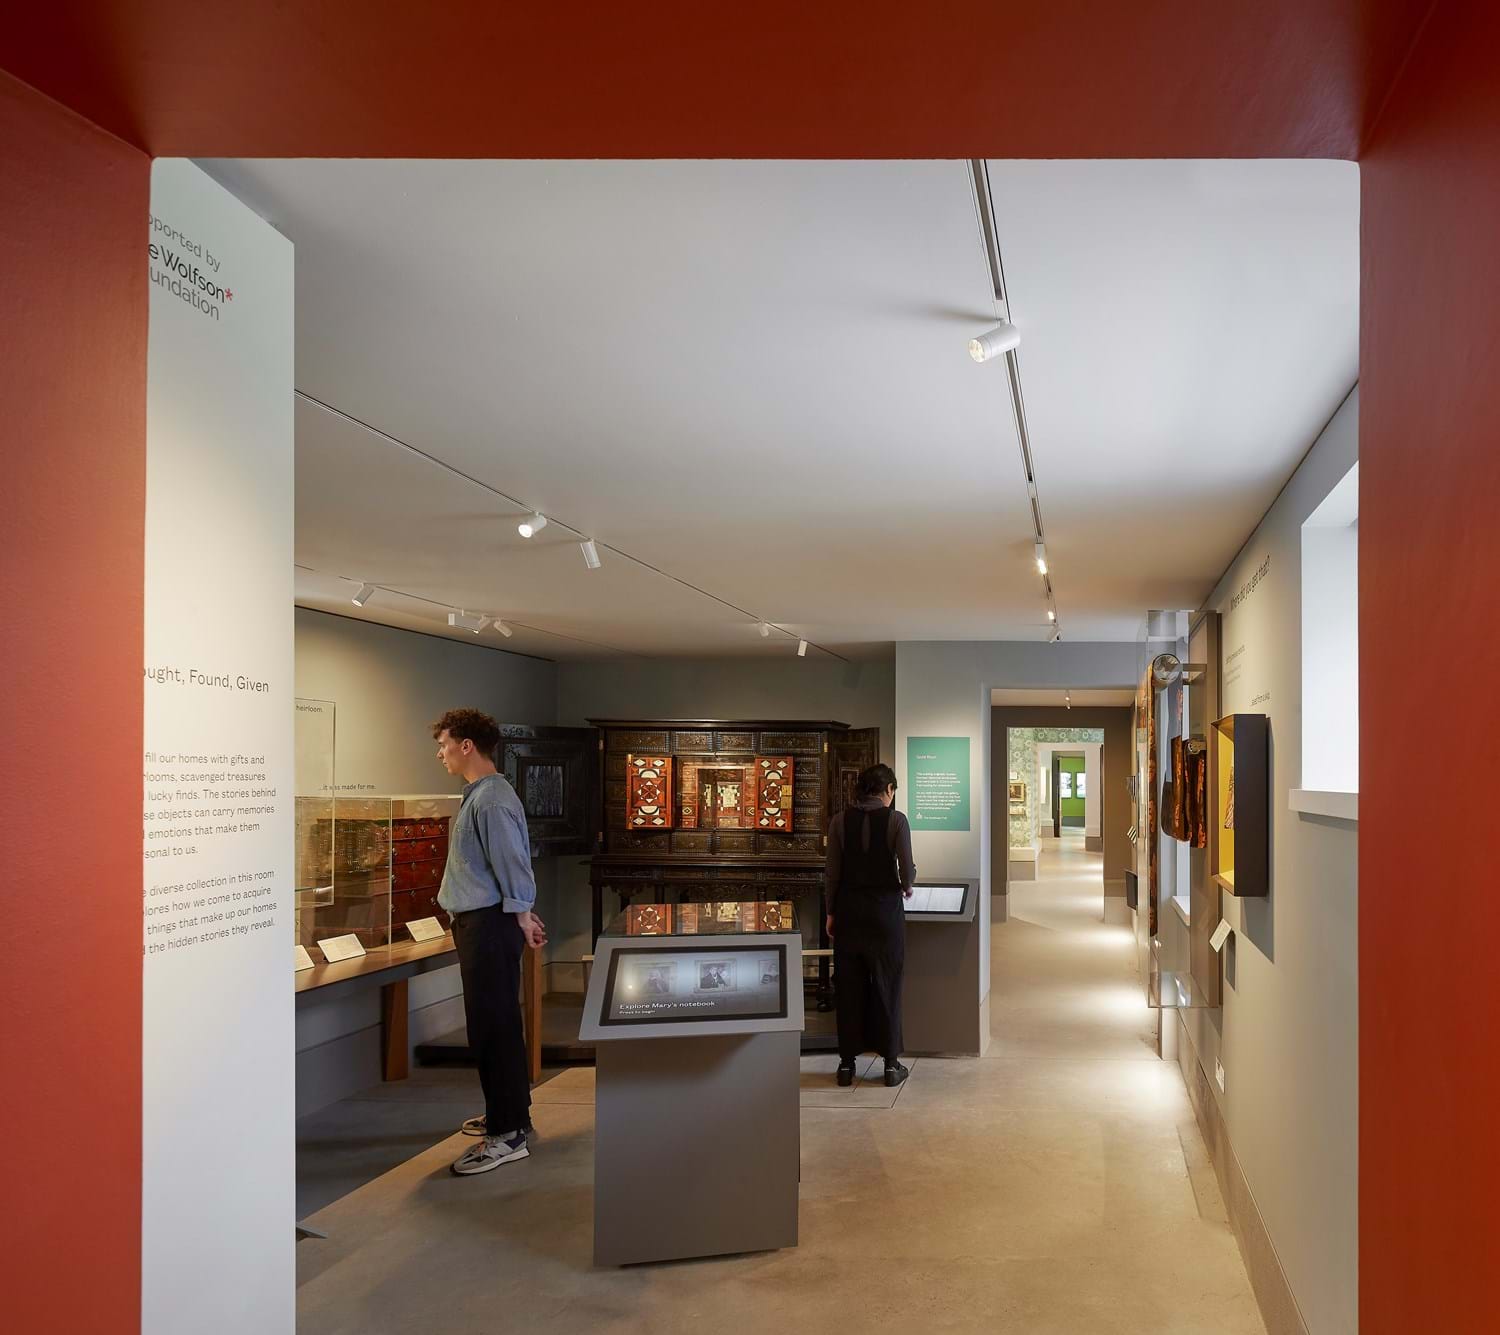 A long museum gallery with spaces to the left displaying furniture, interactive screens and glass cases